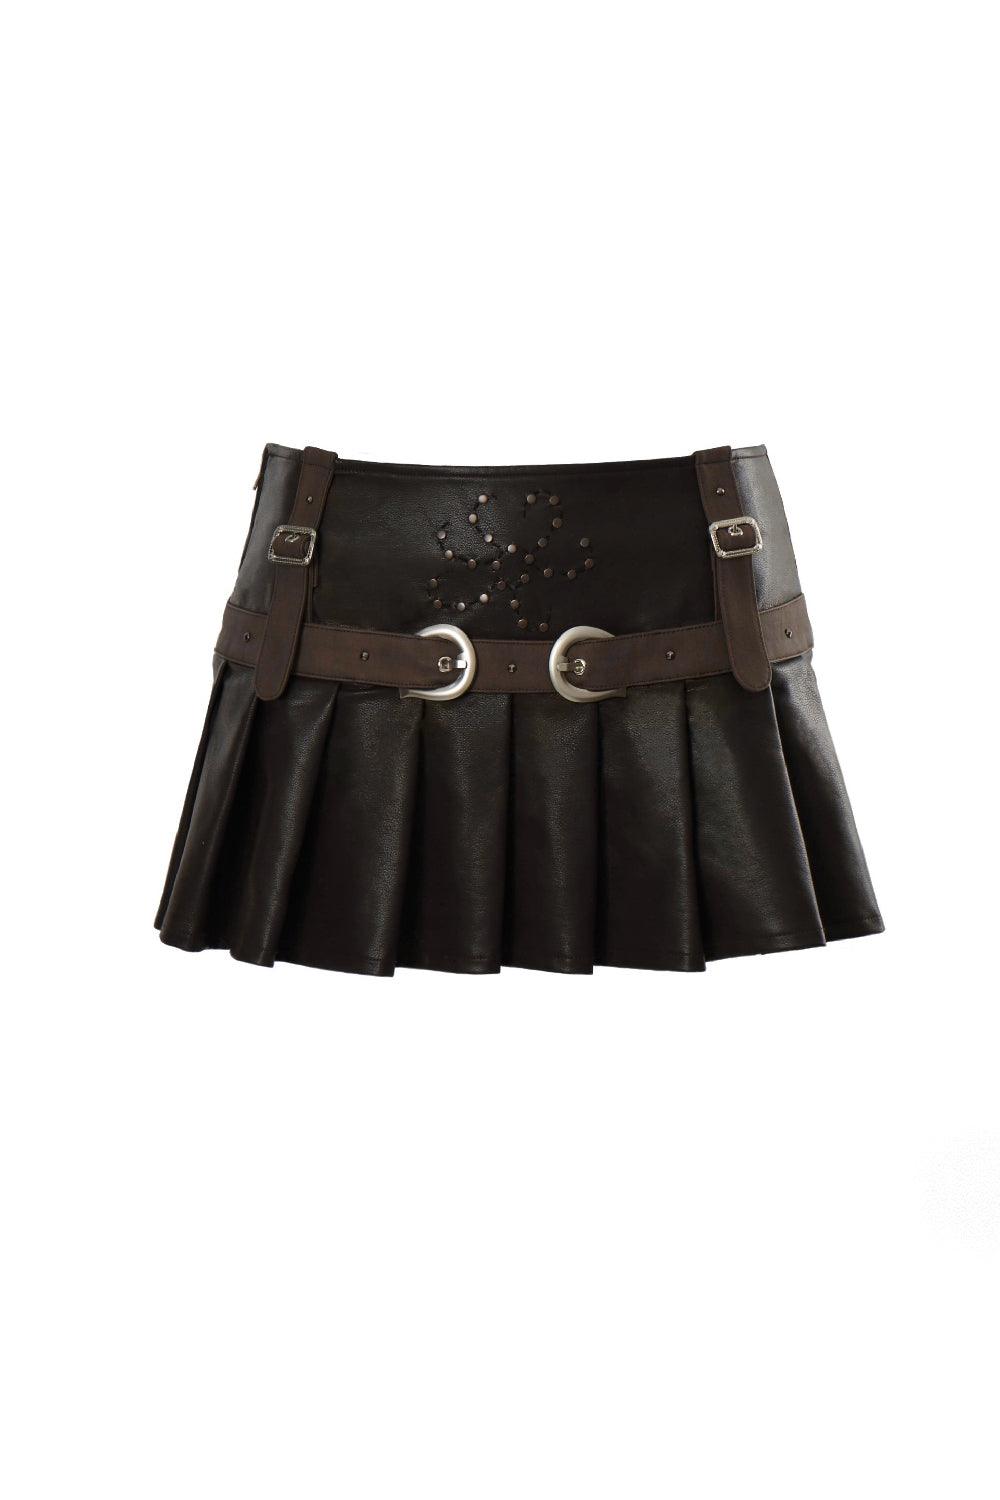 Nailhead Leather Skirt with Belt - Pixie Rebels